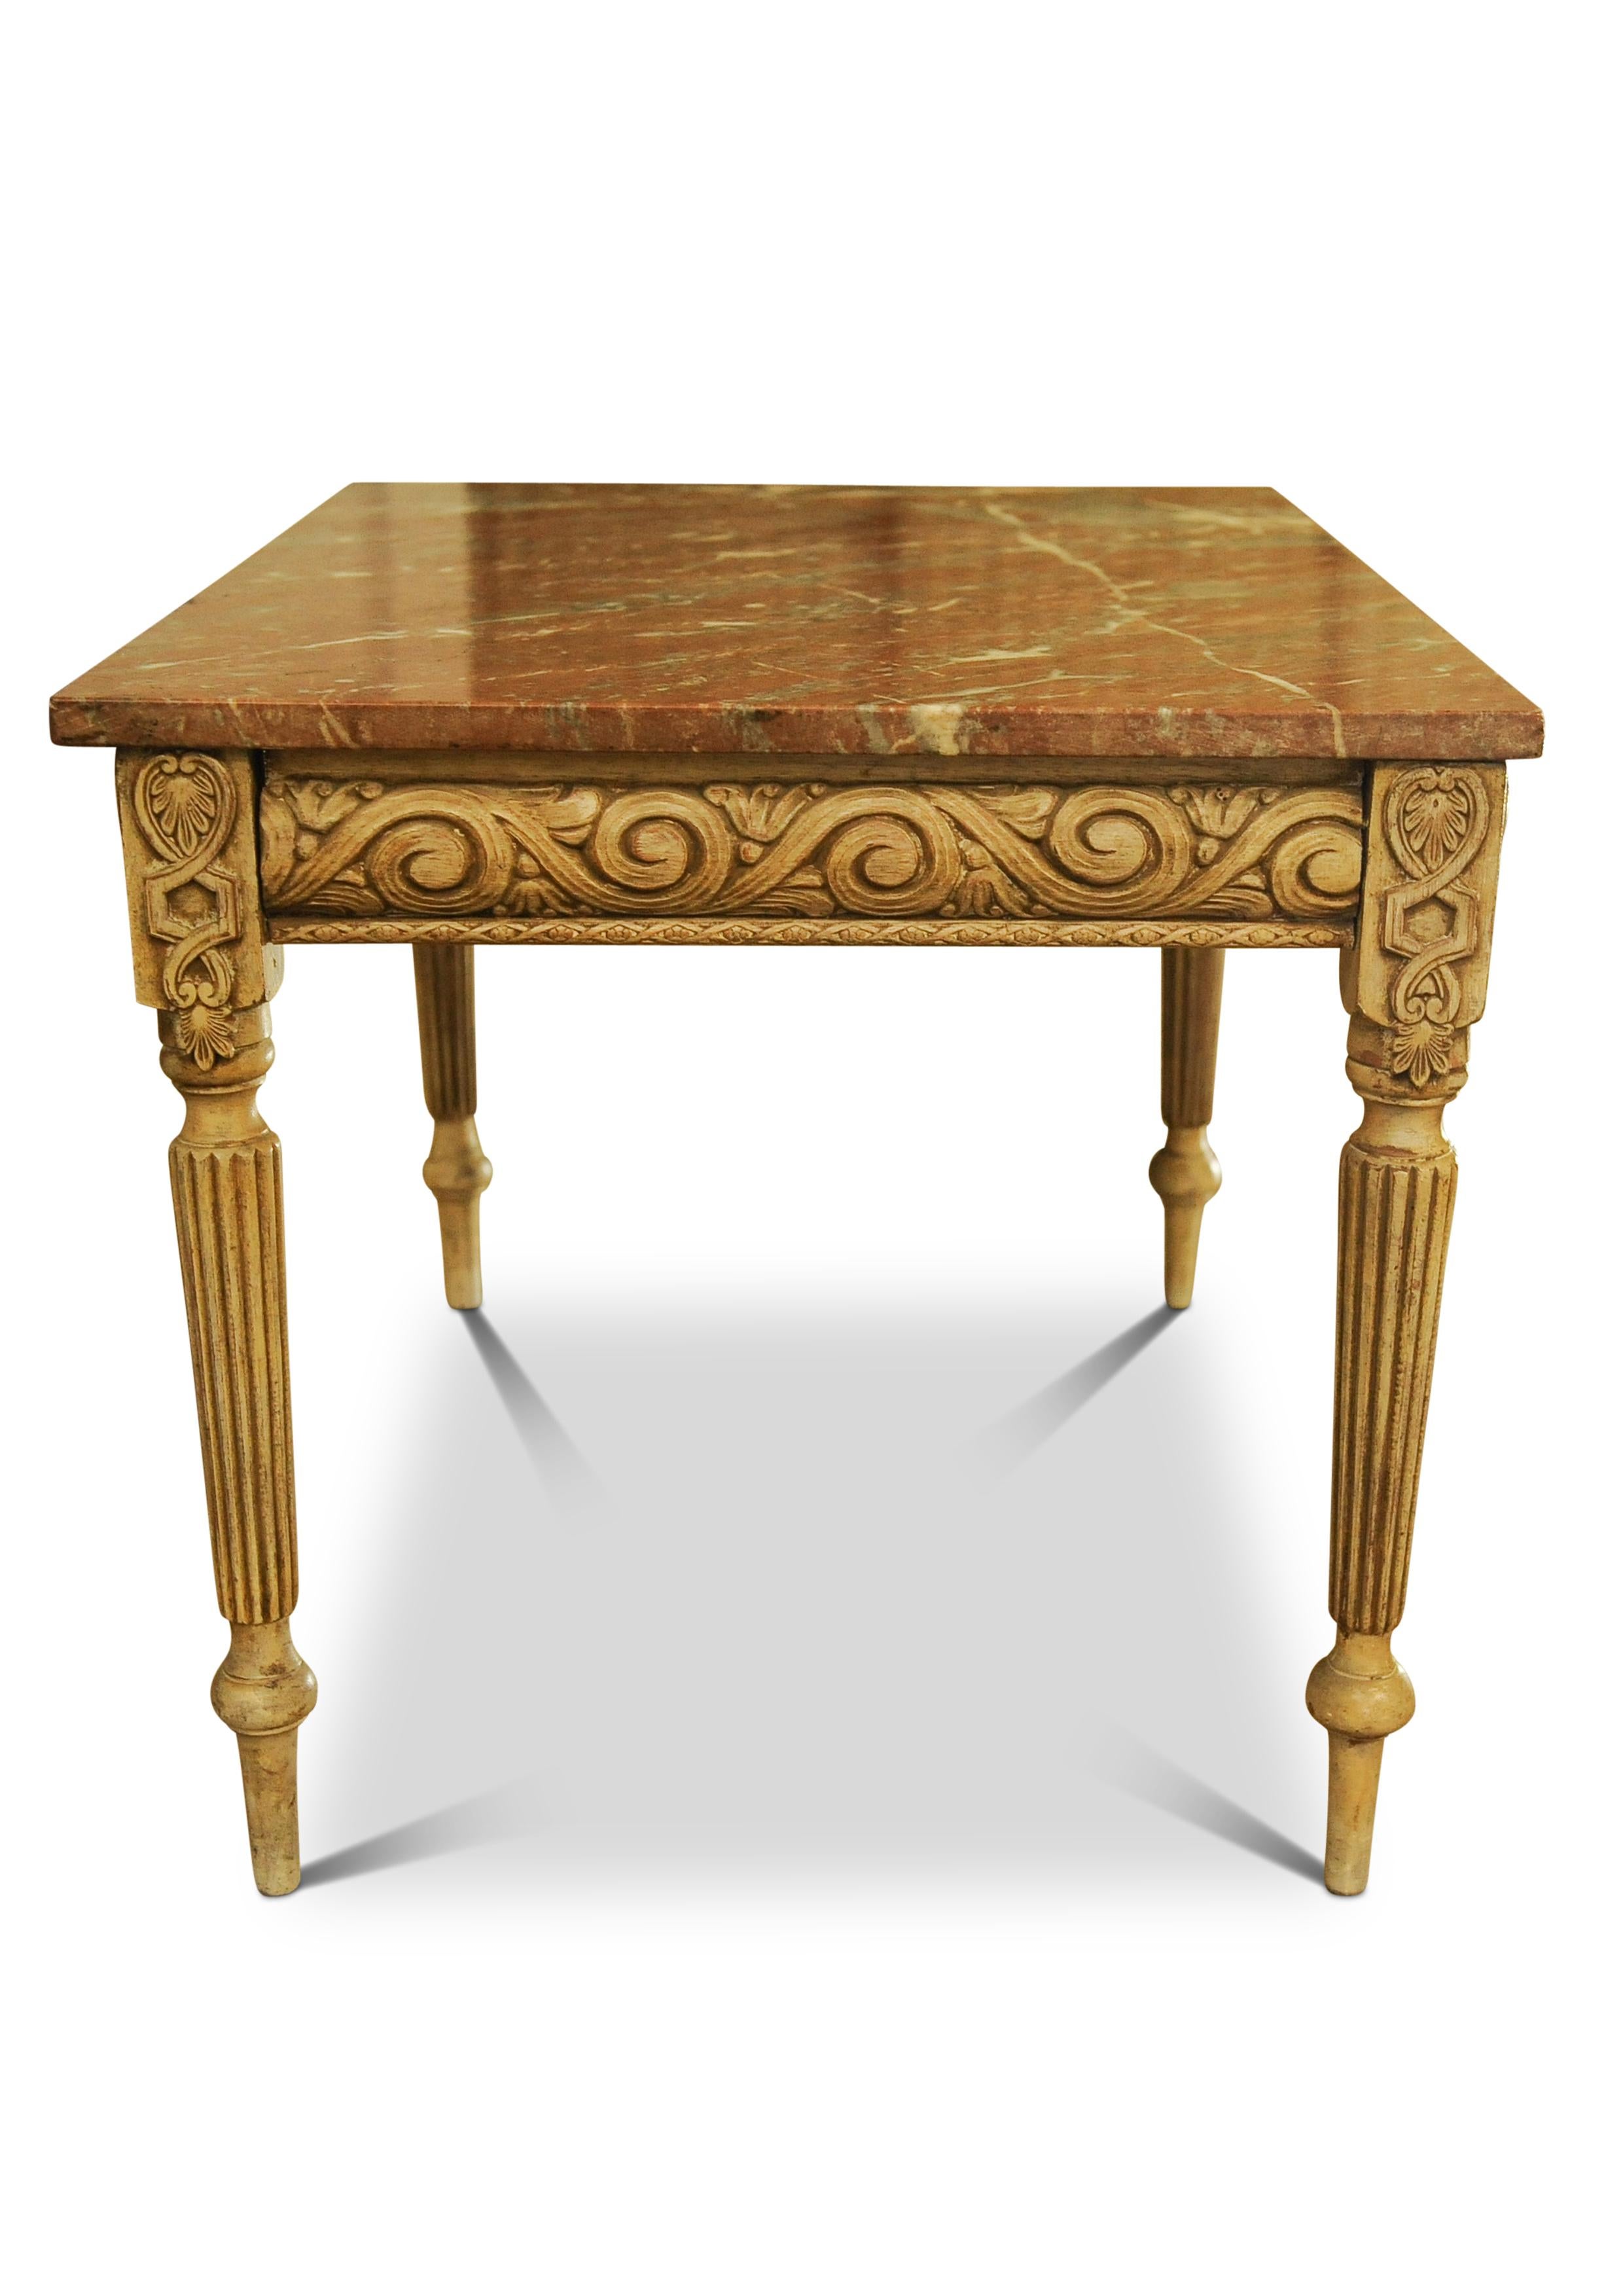 Painted Louis XVI Neoclassical Design Rouge Veined Marble Top Table 1800's For Sale